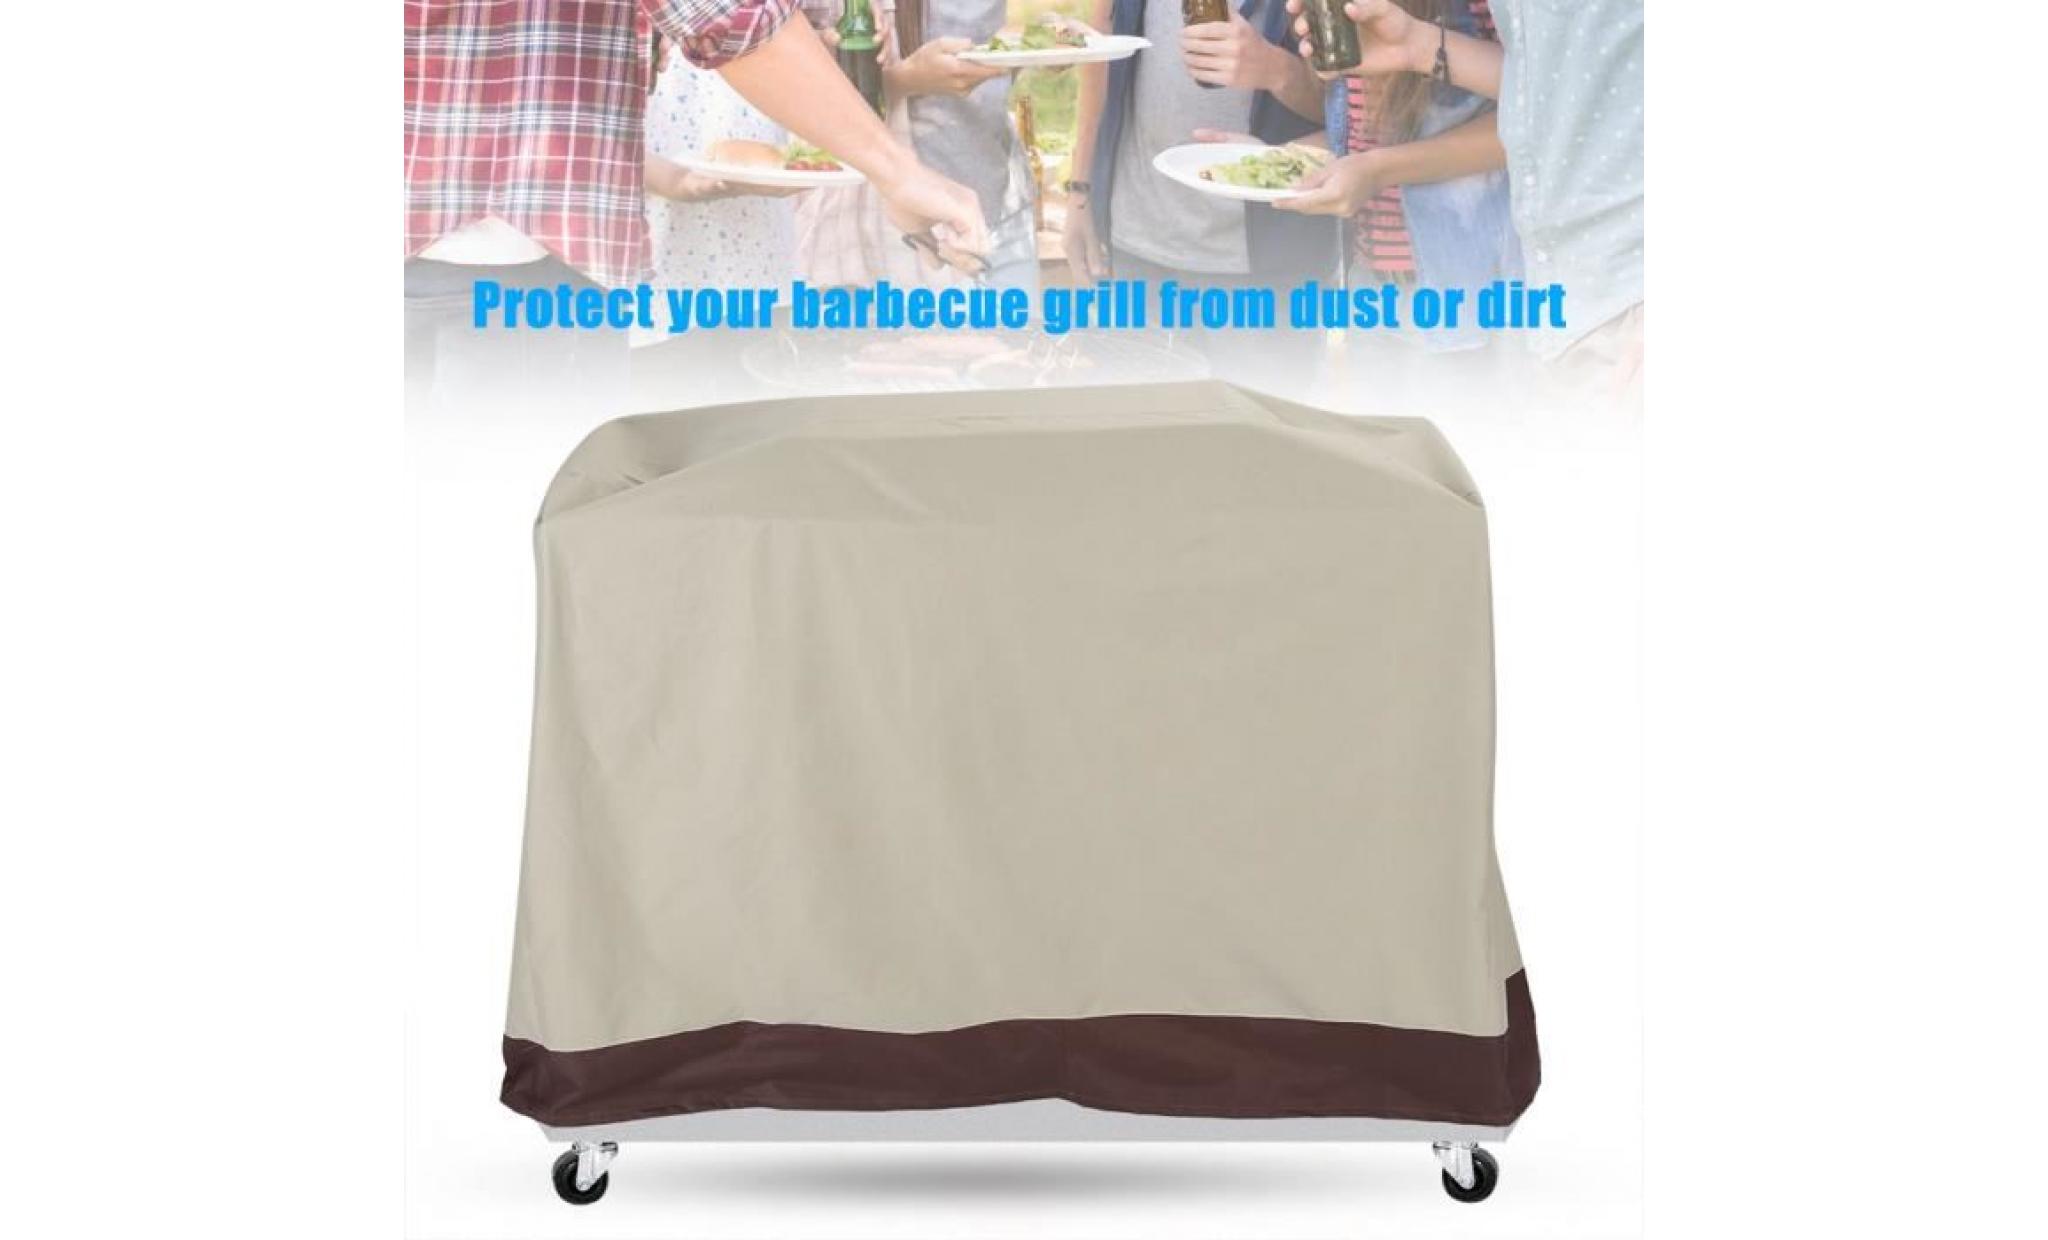 housse barbecue bbq couvercle barbecue protection 182 * 66 * 130cm